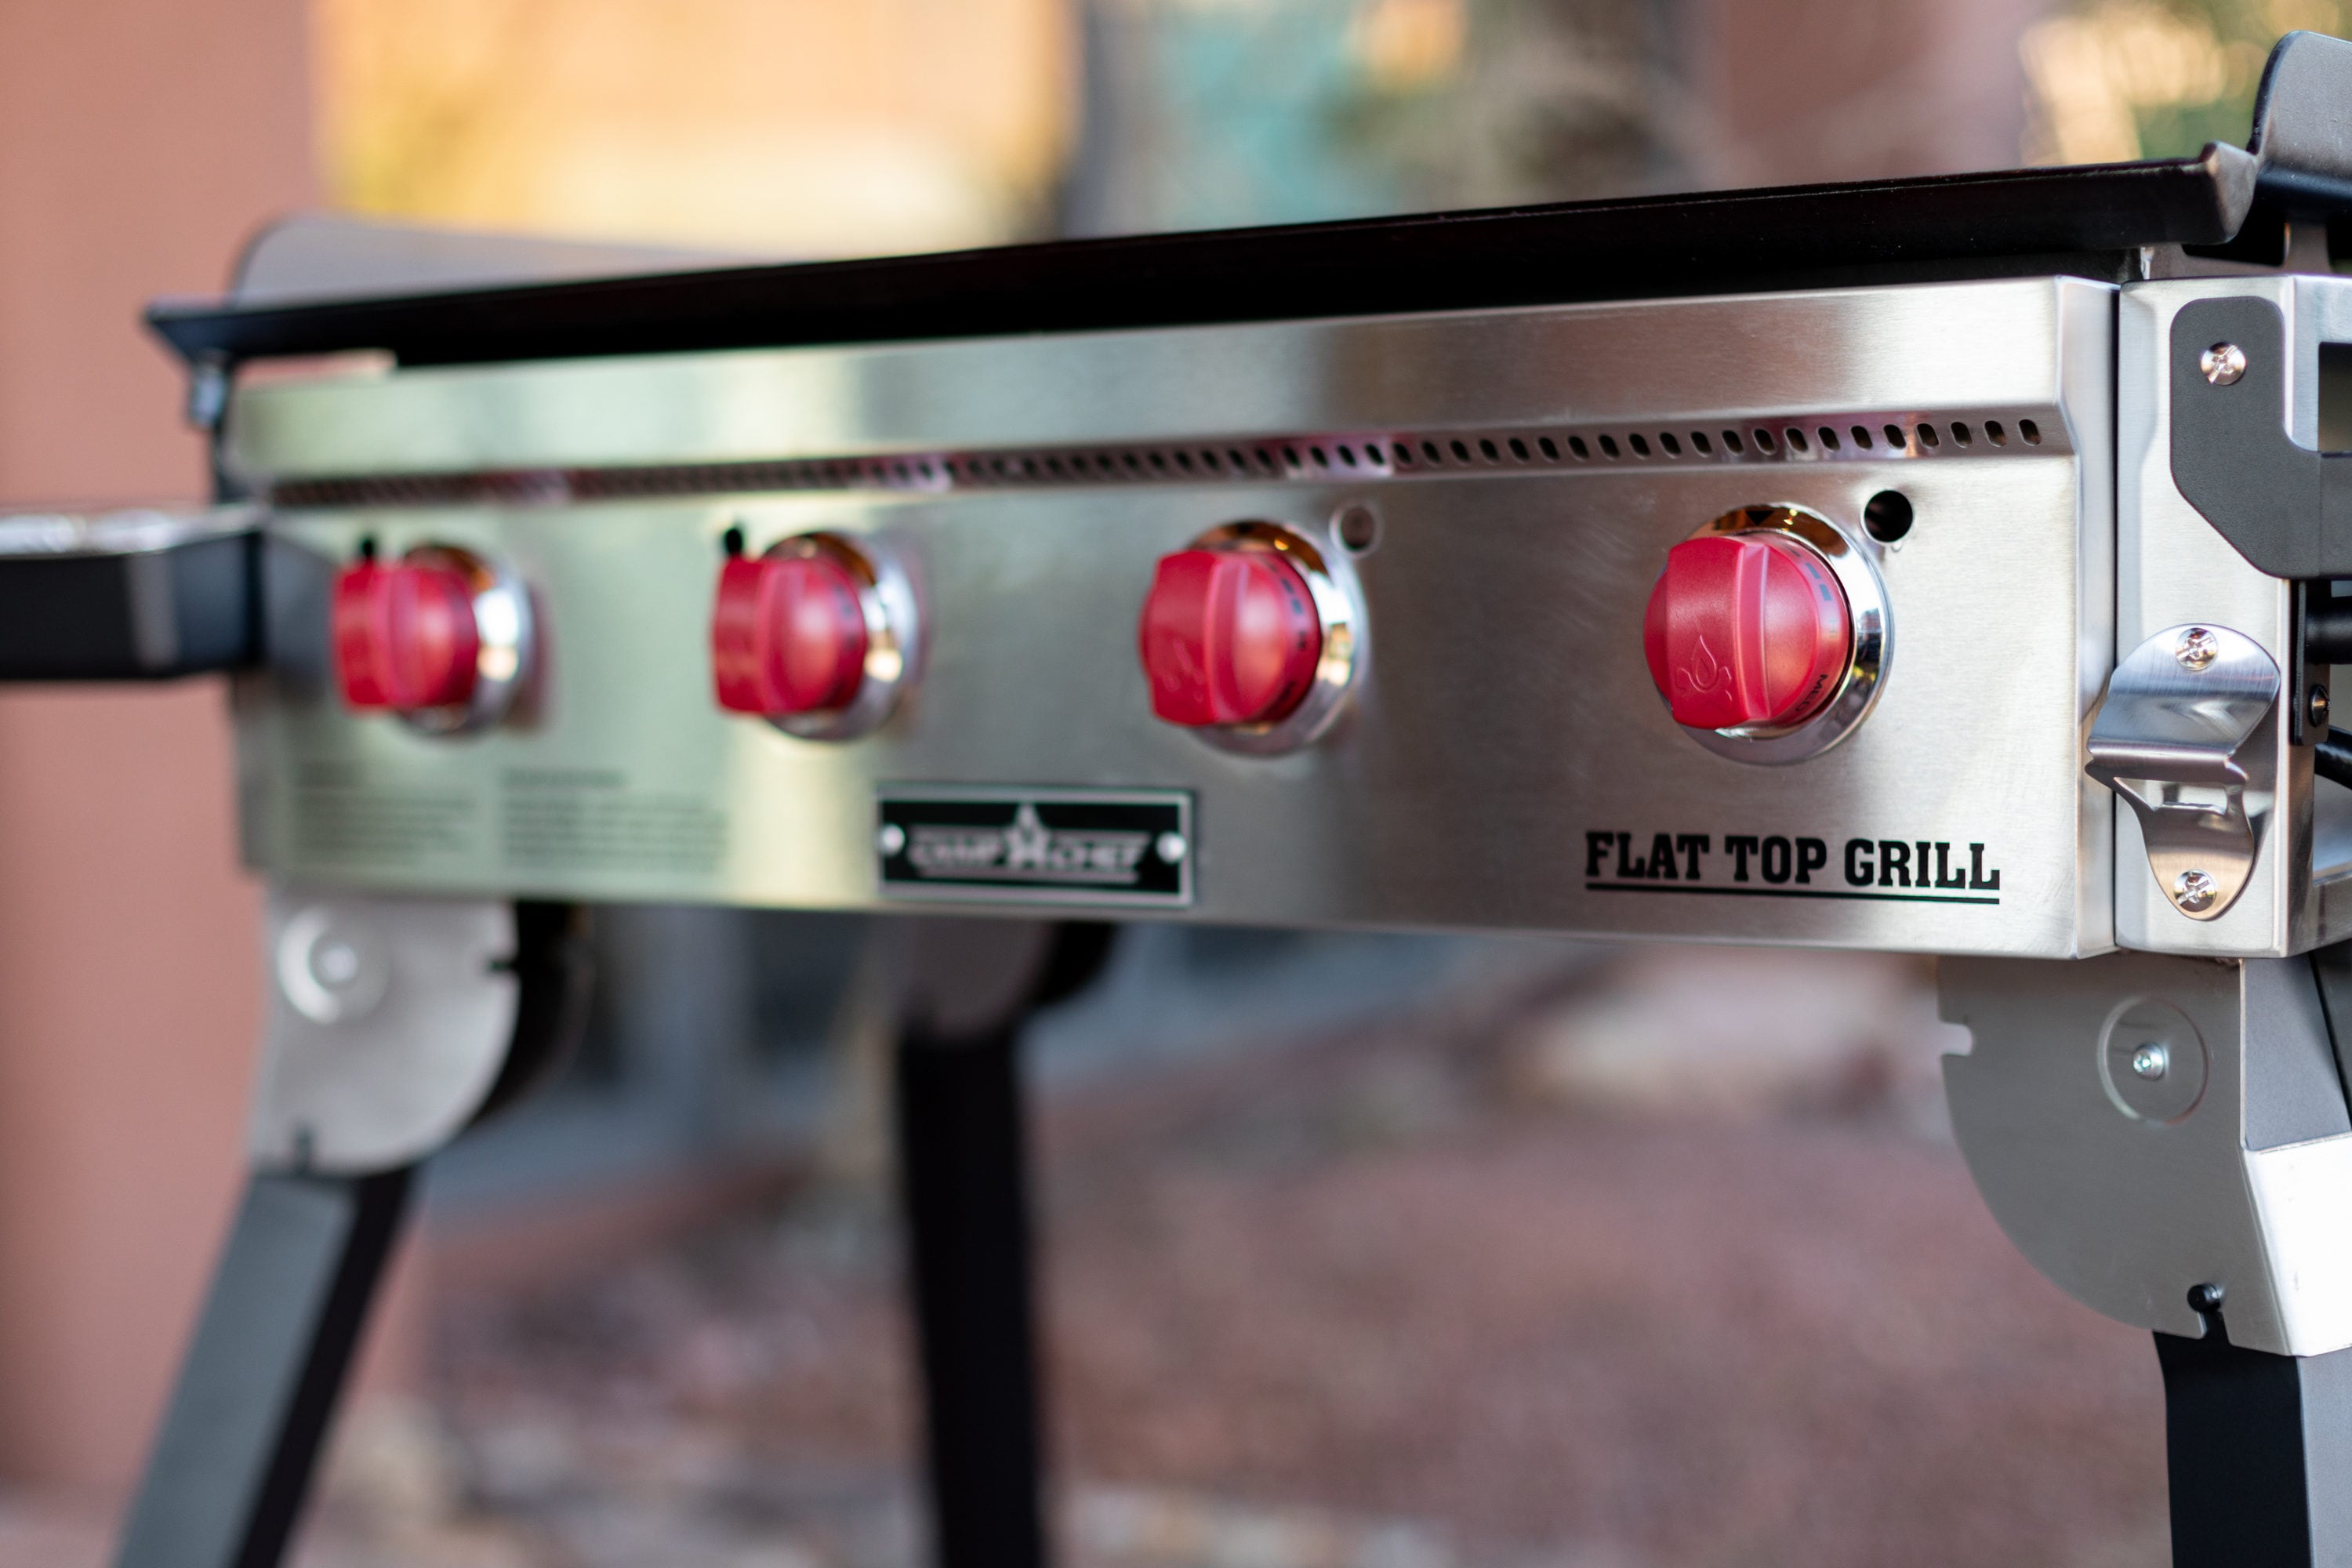 Camp Chef Portable 4 burner Flat Top Gas Grill FTG600P